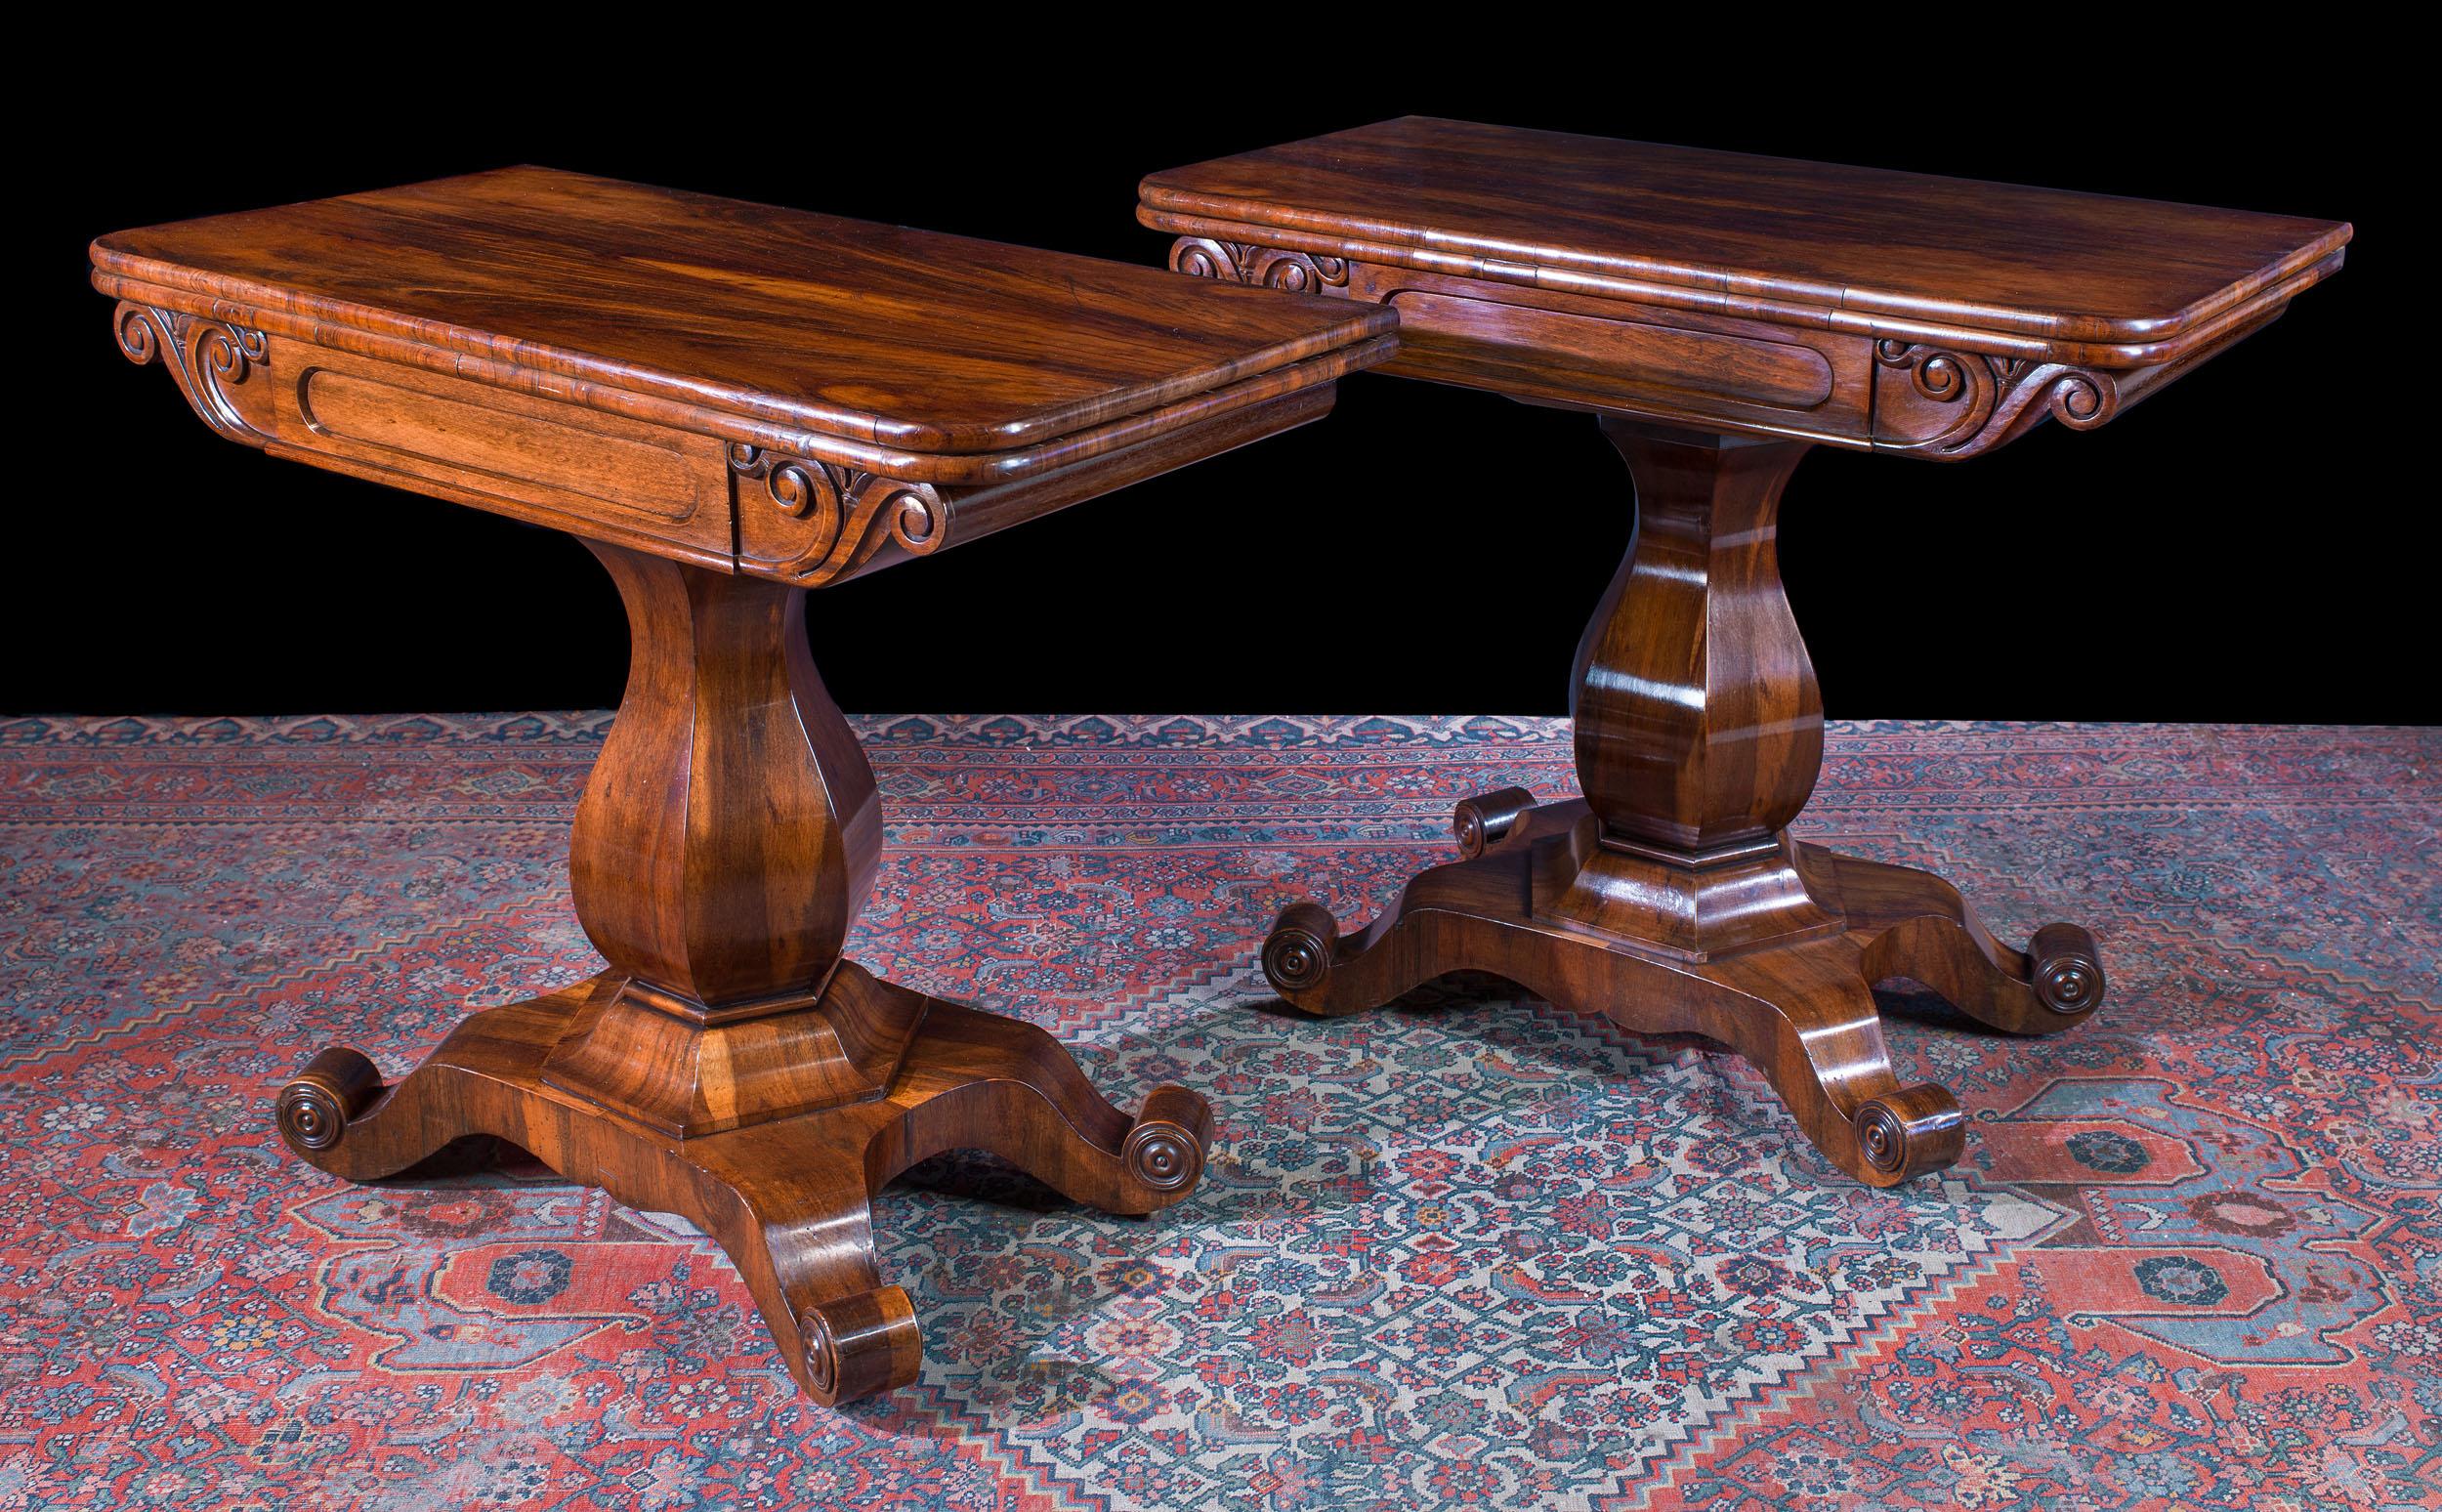 A pair of William IV tea tables, with book matched veneered tops in the rare Goncalo Alves, or Brazilian tiger wood, the mirror image of the other. The folding tops are mounted on sweeping hexagonal baluster supports, over swept feet. The tables are